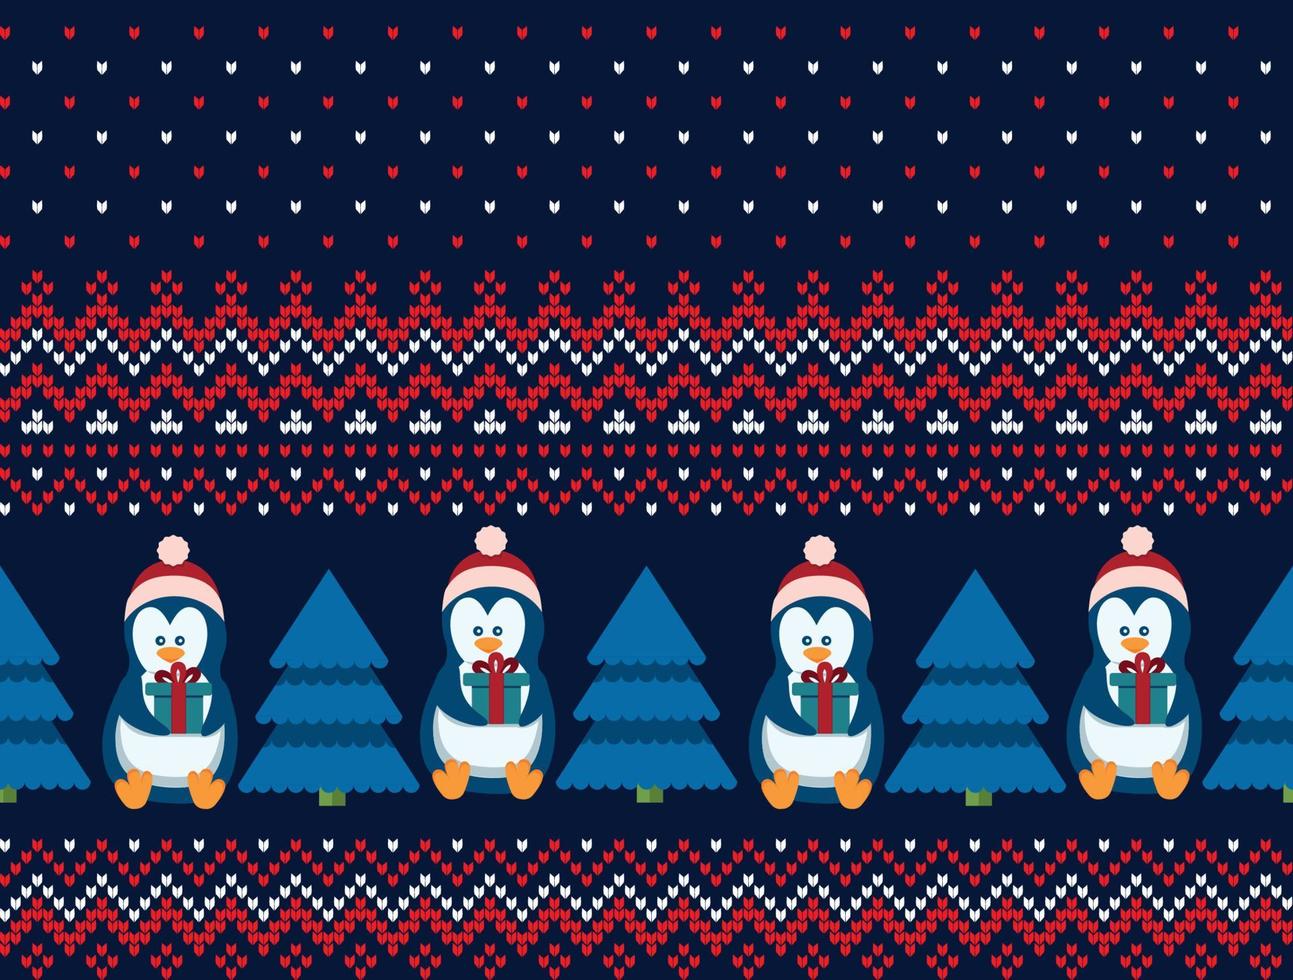 Knitted Christmas and New Year pattern. Wool Knitting Sweater Design. Wallpaper wrapping paper textile print. Eps 10 vector